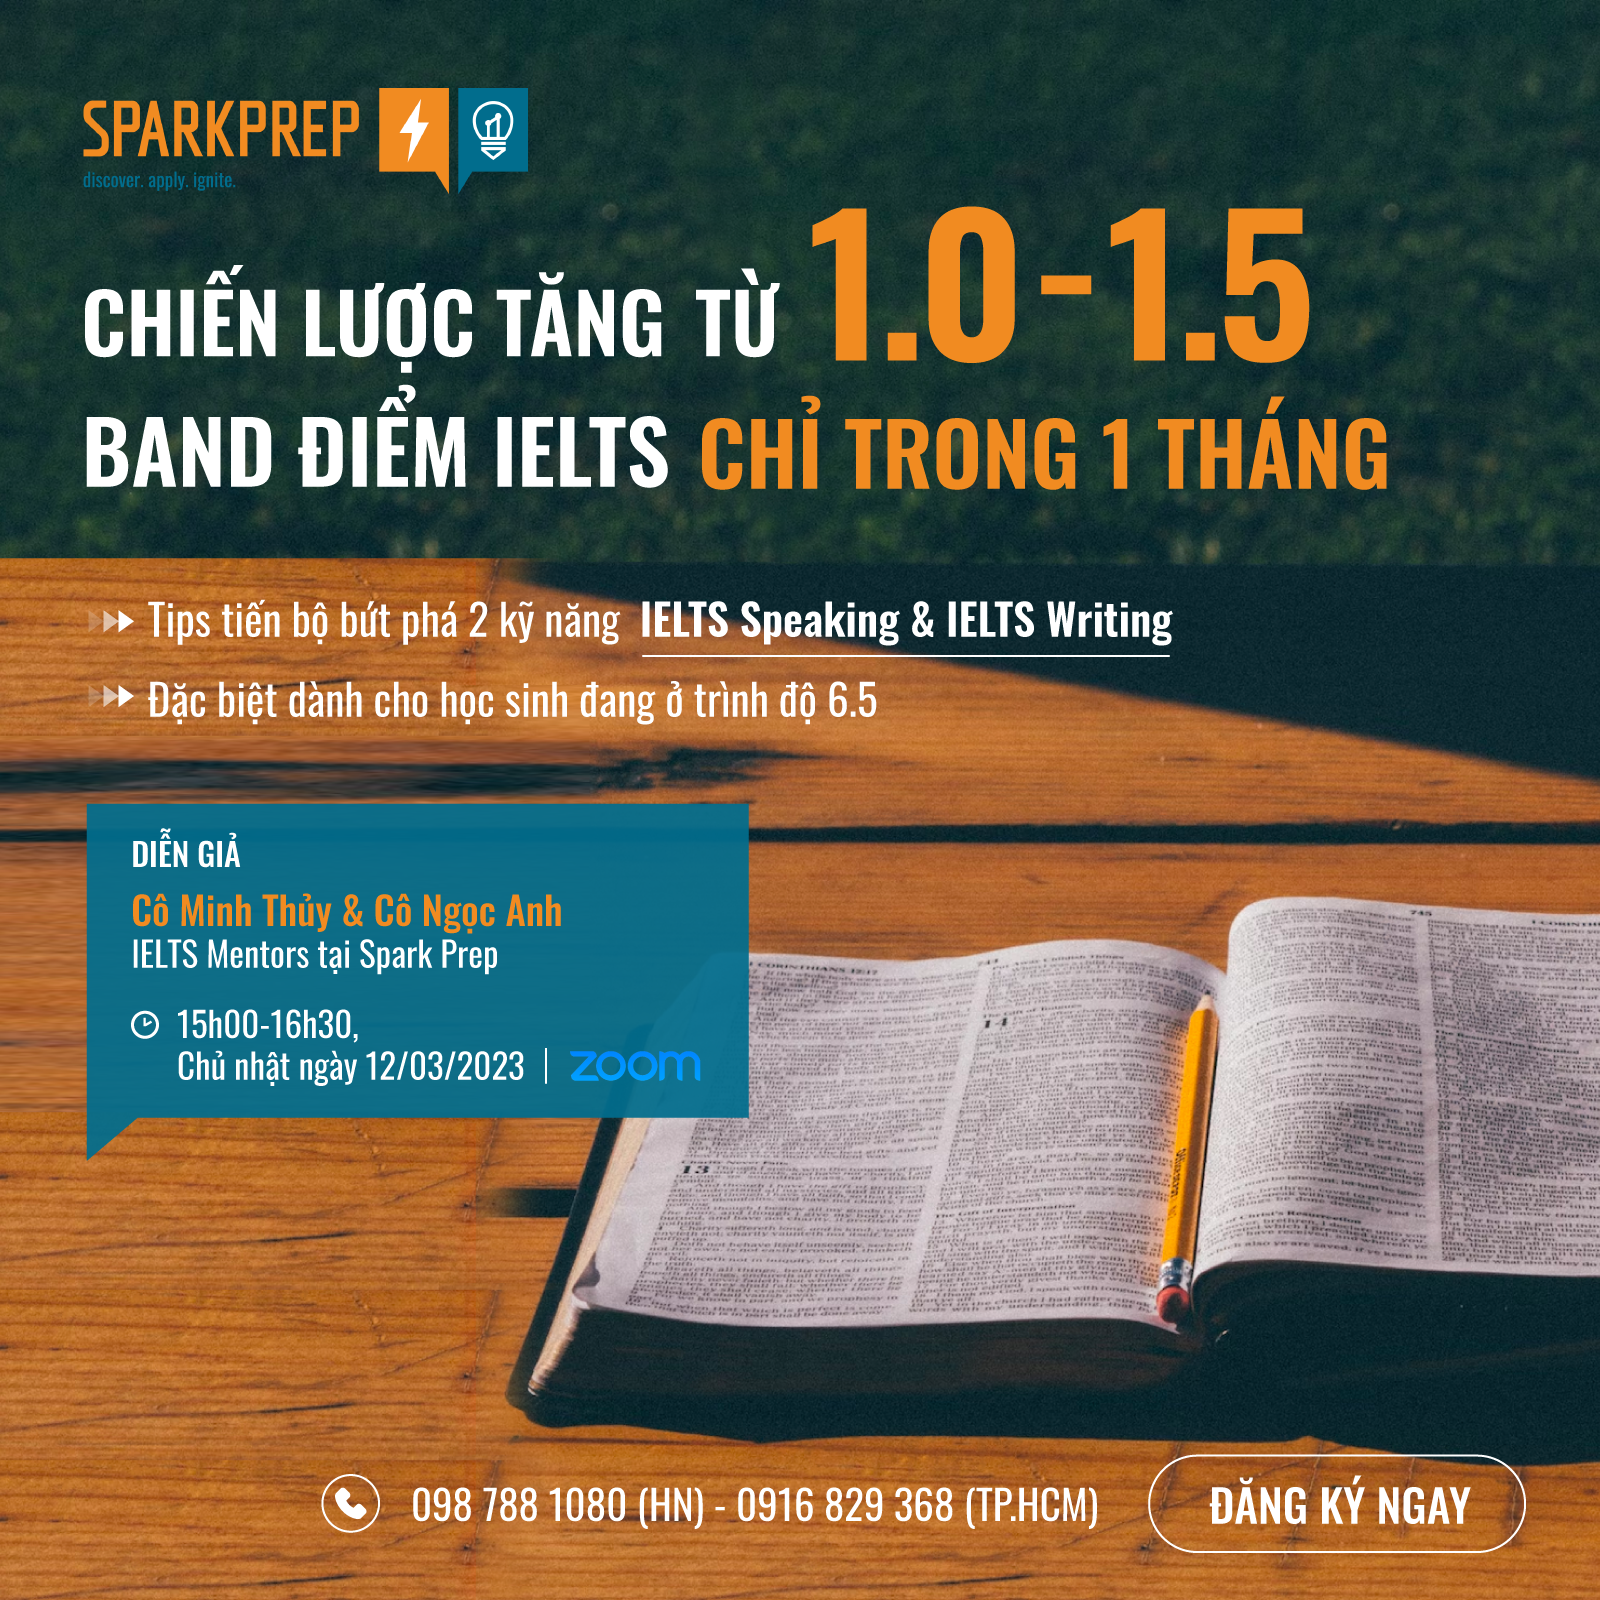 Boost your IELTS score with Spark Prep!